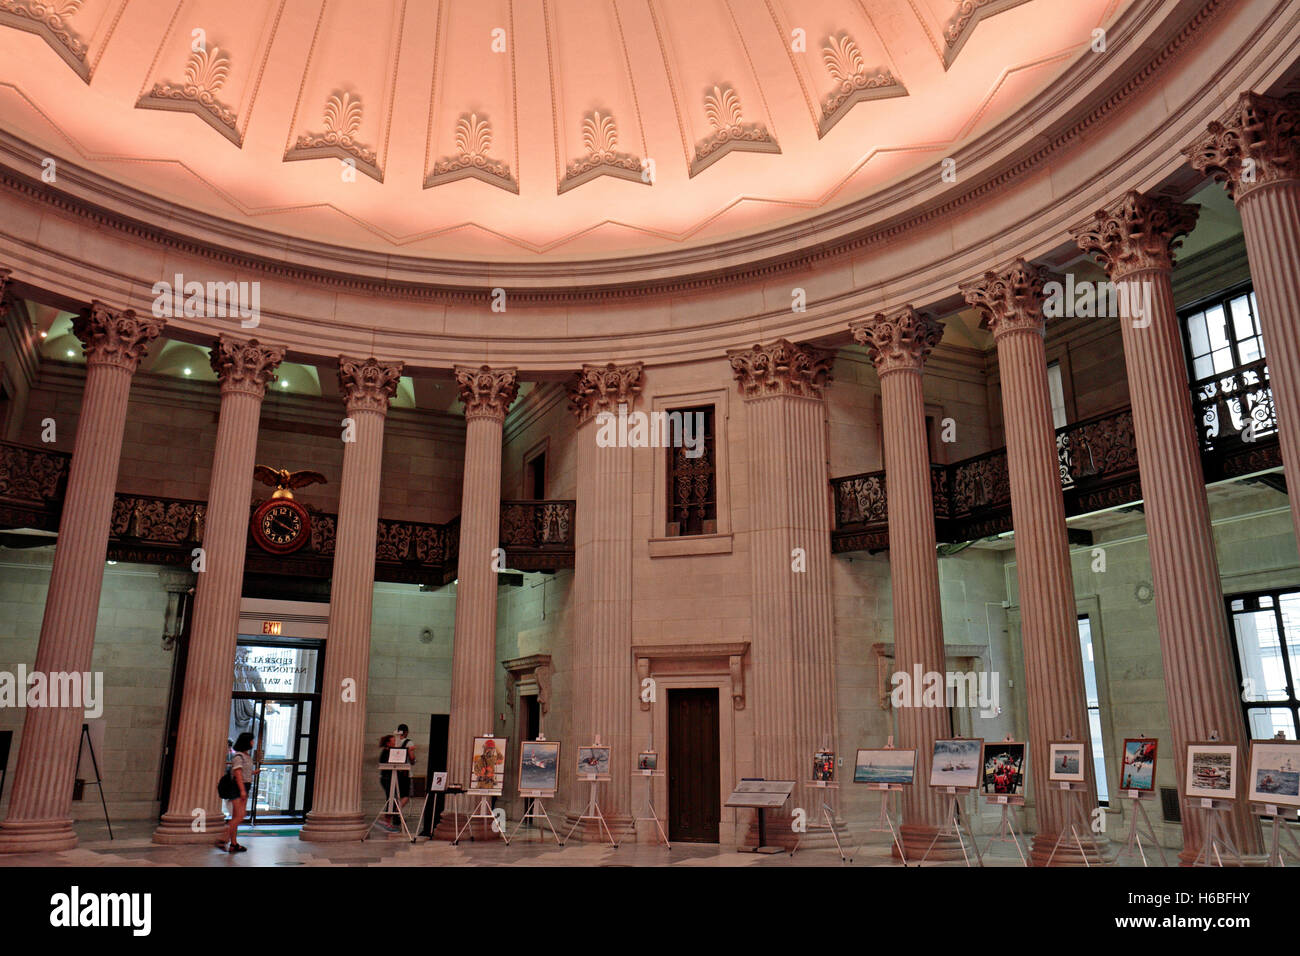 Inside the Federal Hall National Memorial, Wall Street, Manhattan, New York, United States. Stock Photo